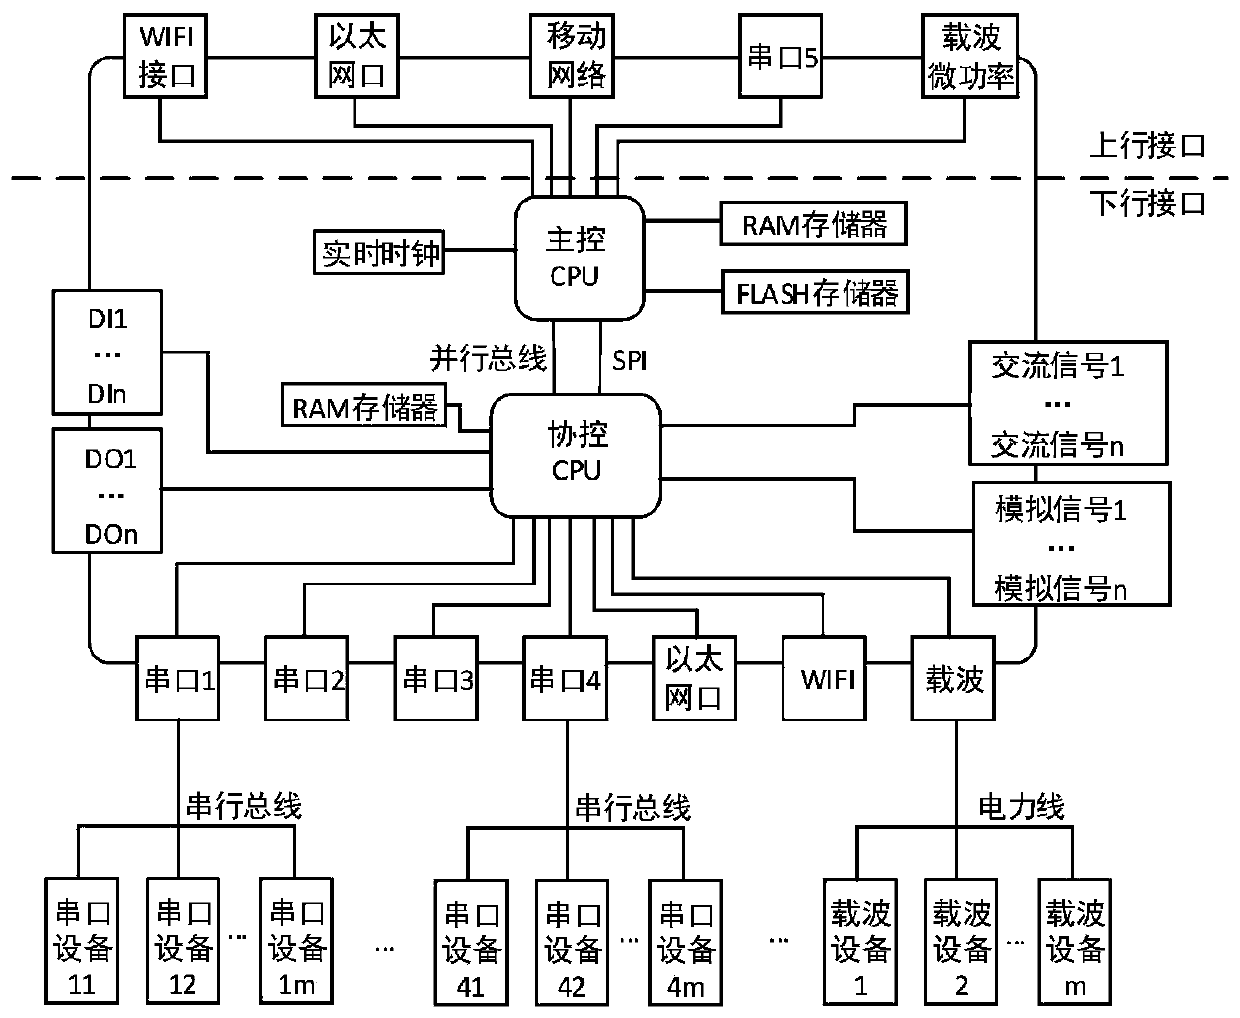 Power distribution network downlink equipment management device and management method